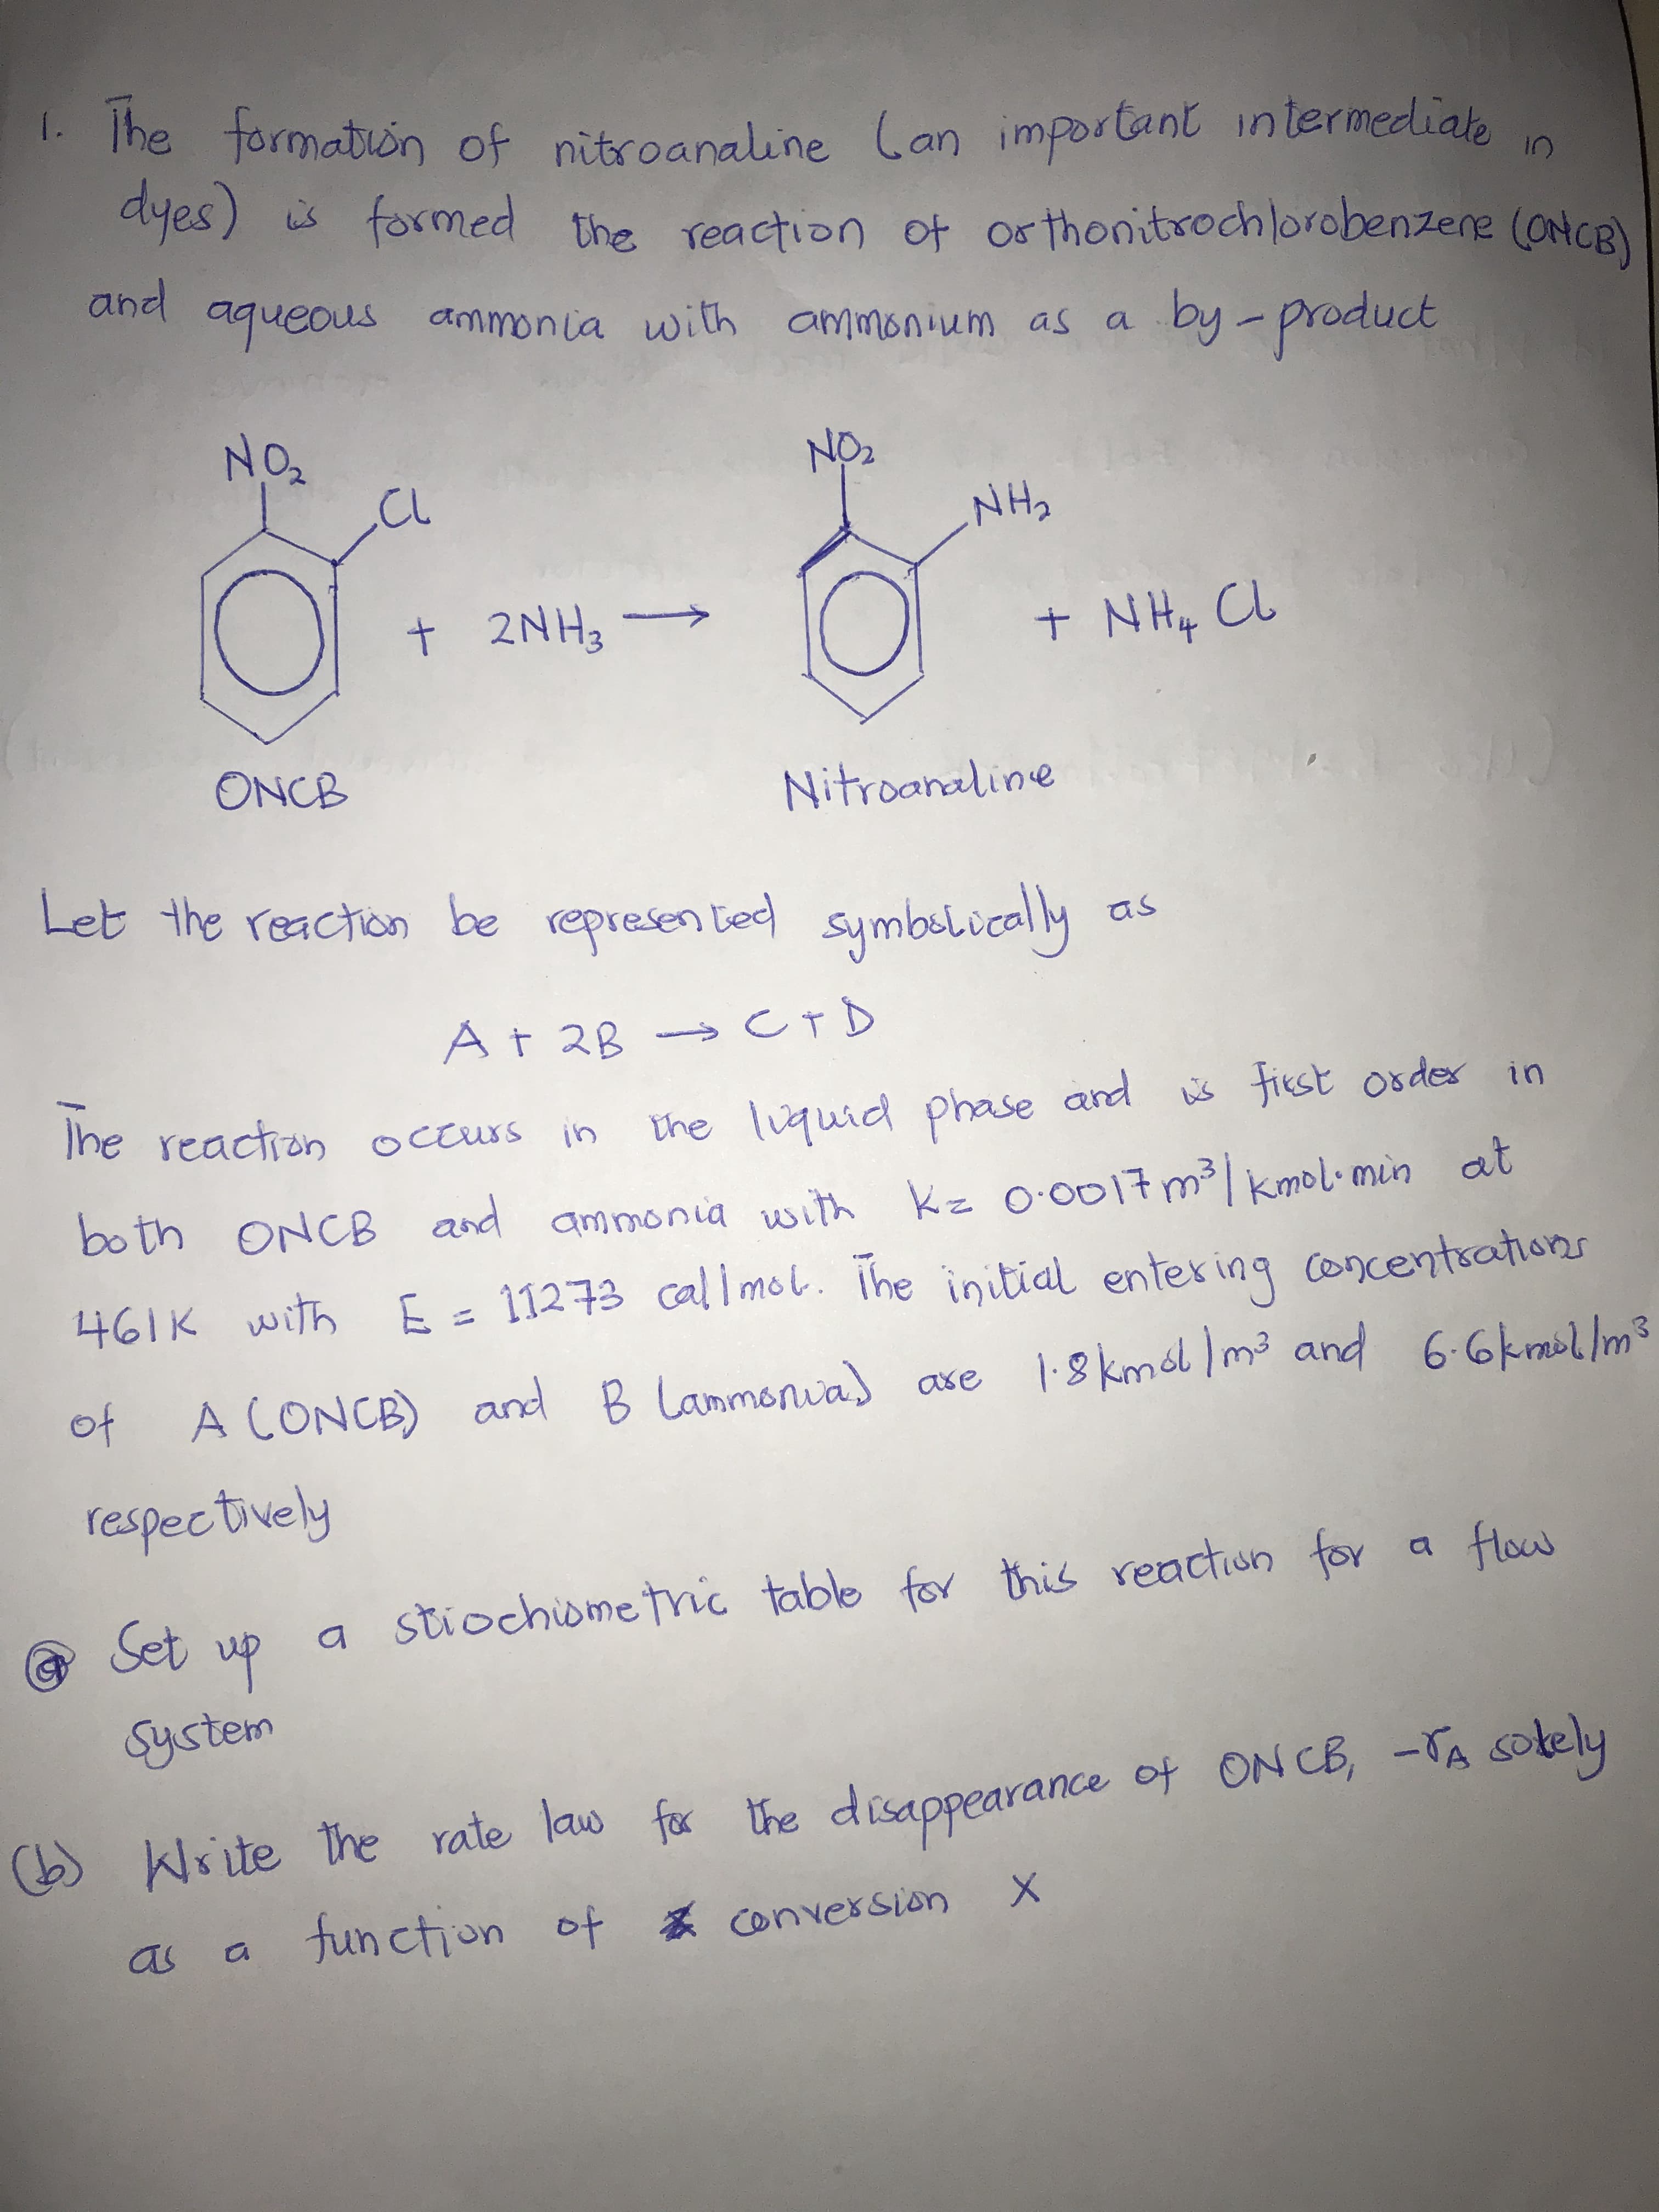 The formation of nitroanaline Can
ayes) is formed the reaction of orthonitrochlorobenzene (ONCB)
important intermediale
in
and
aqueous ammonia with ammonium as a
by-product
